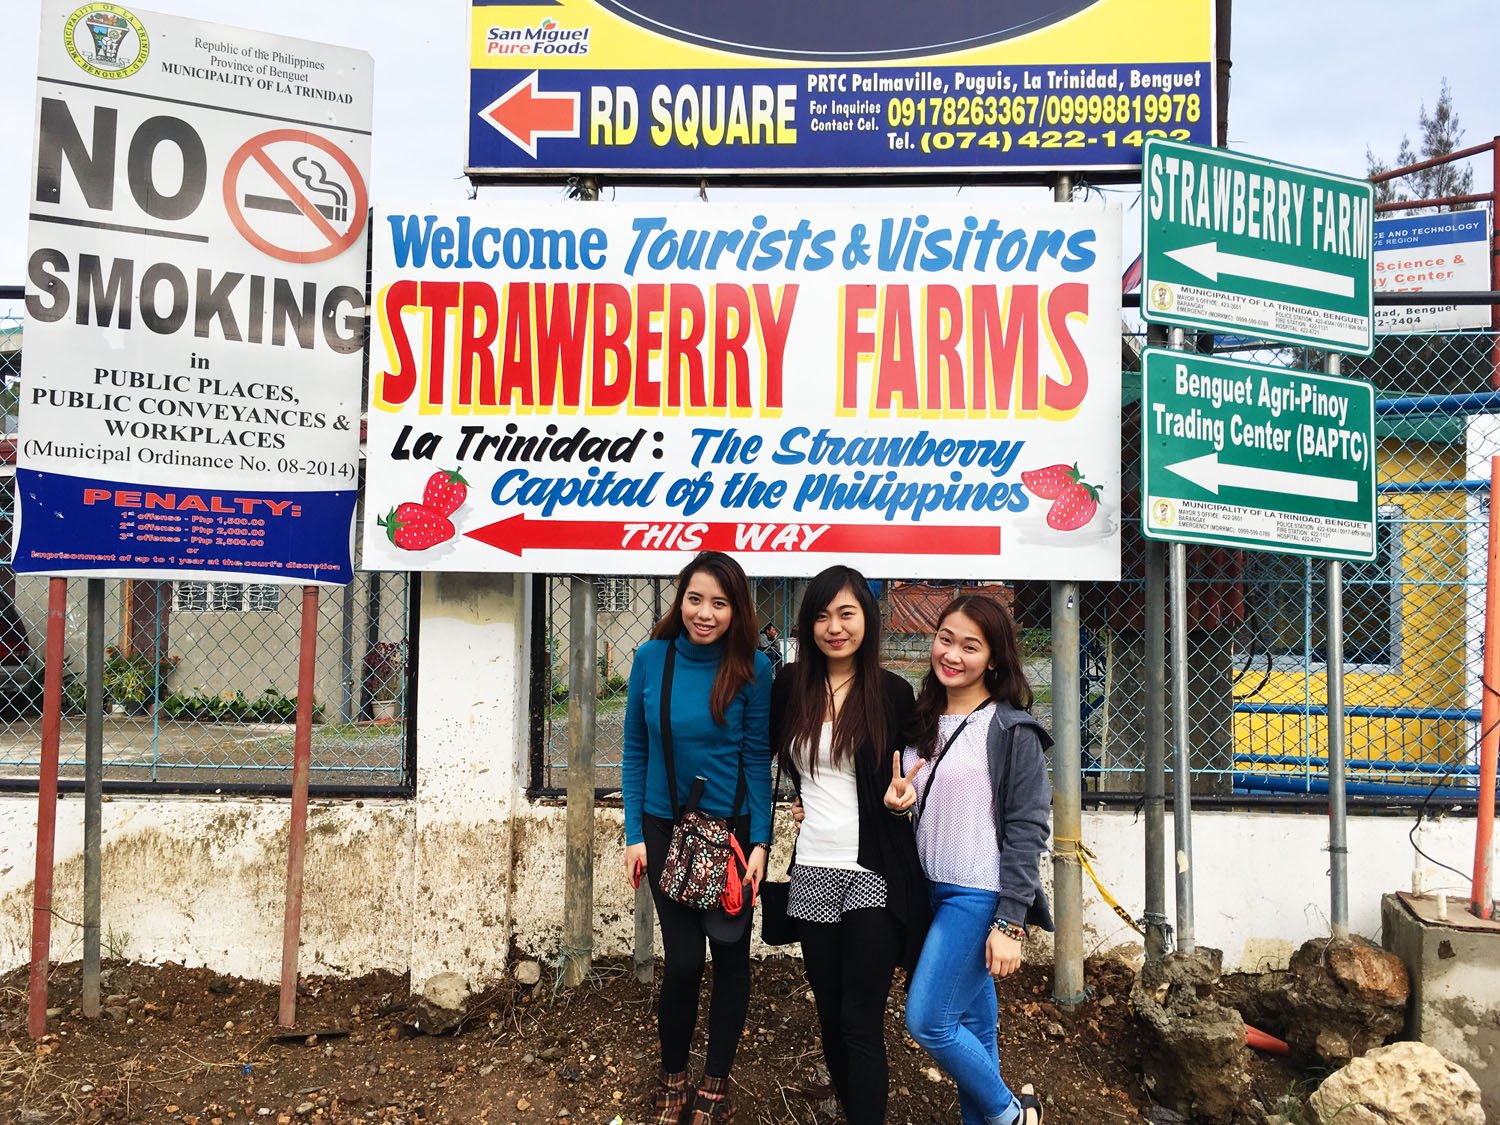 Strawberry Farm Baguio Travel Guide 2019 Lost And Wonder